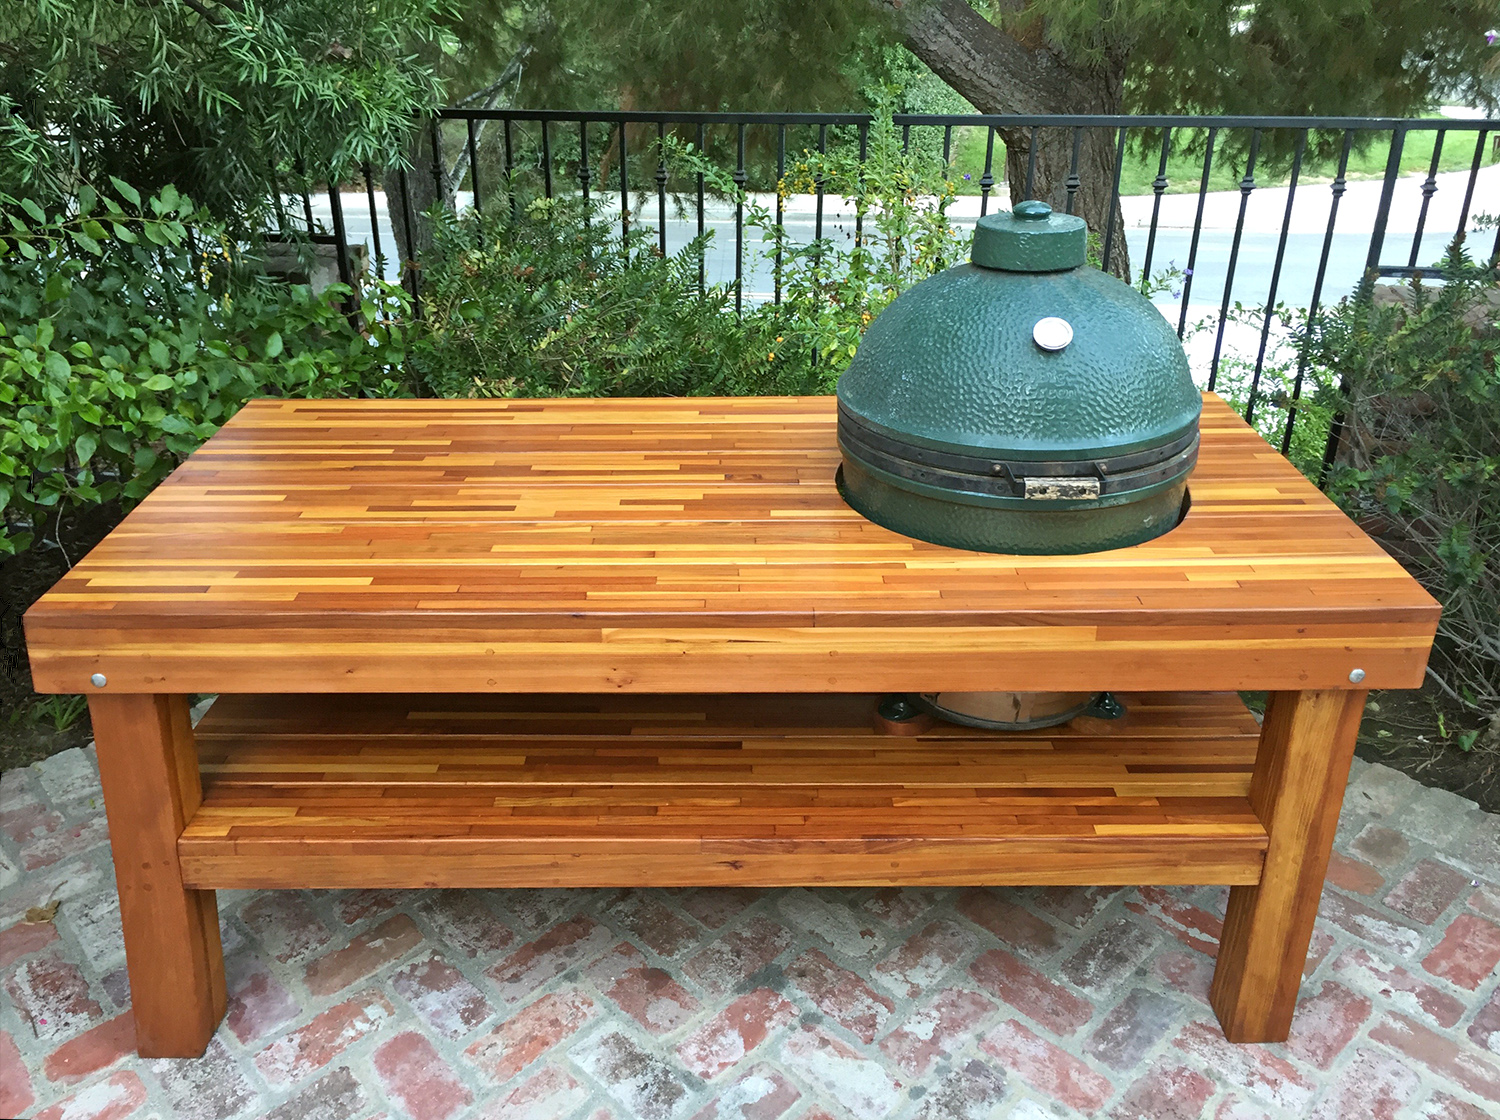 Outdoor Wood Table With Built In Grill, Outdoor Wood Grill Table